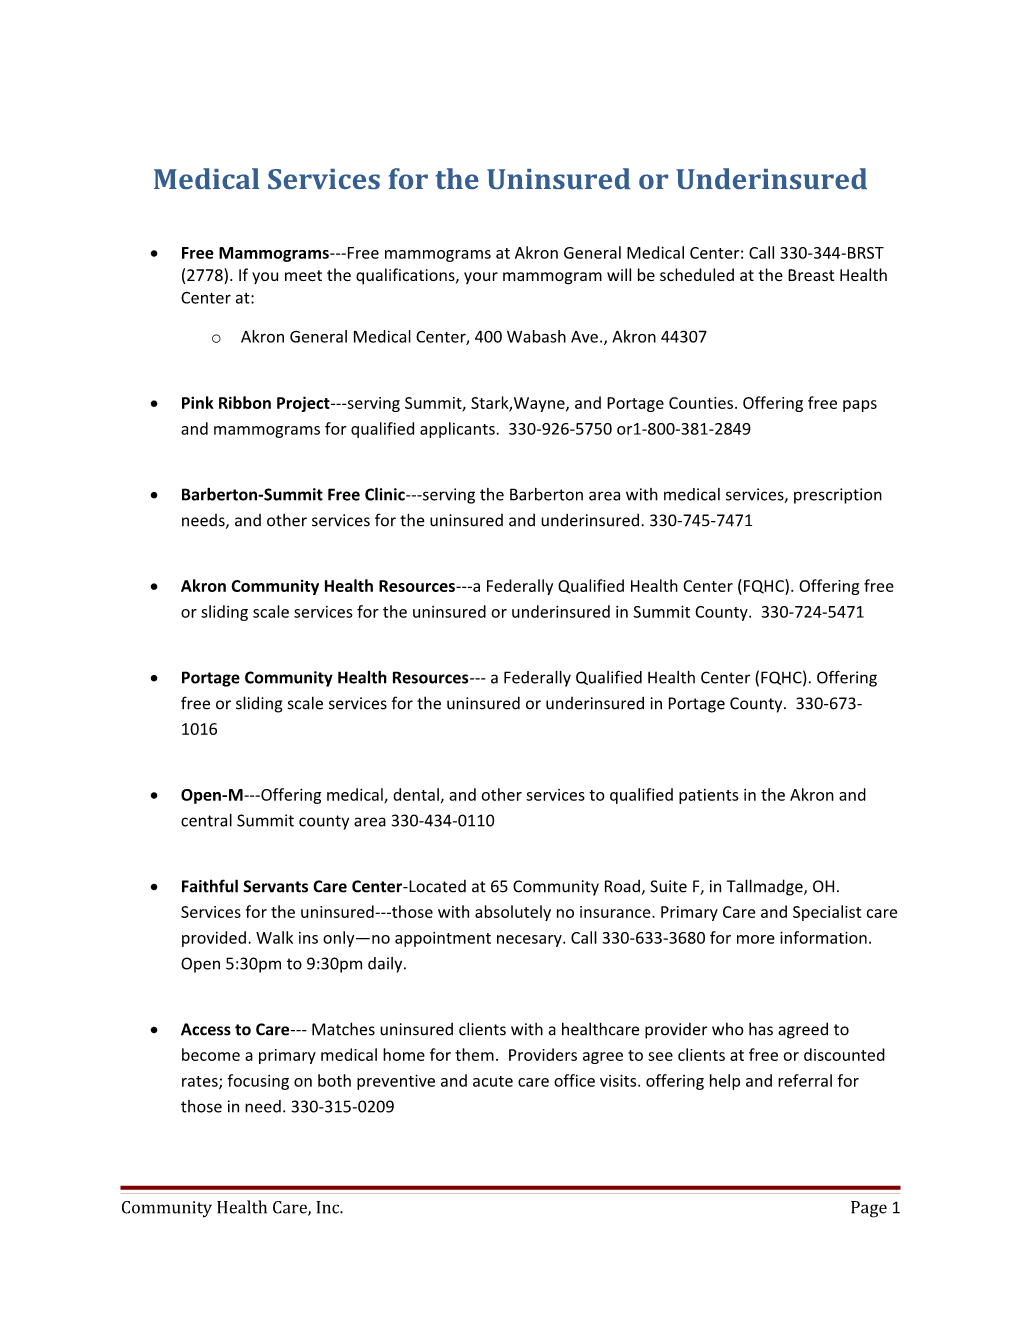 Medical Services for the Uninsured Or Underinsured